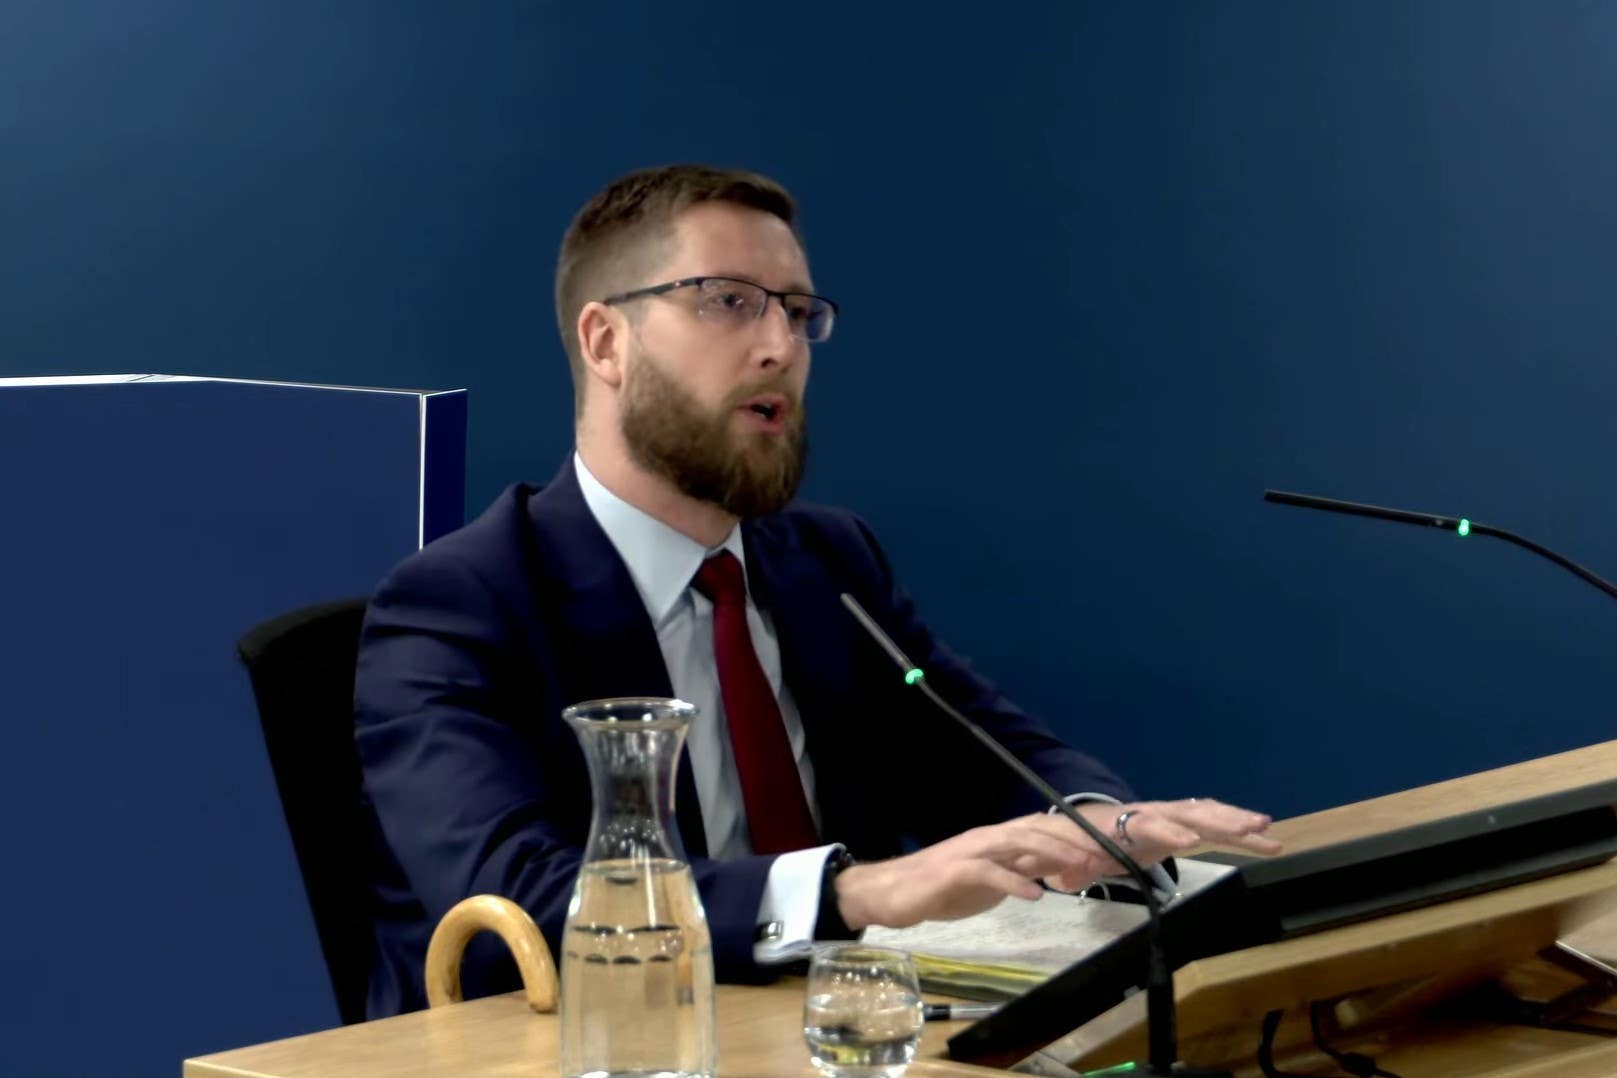 Cabinet Secretary Simon Case giving evidence at the inquiry